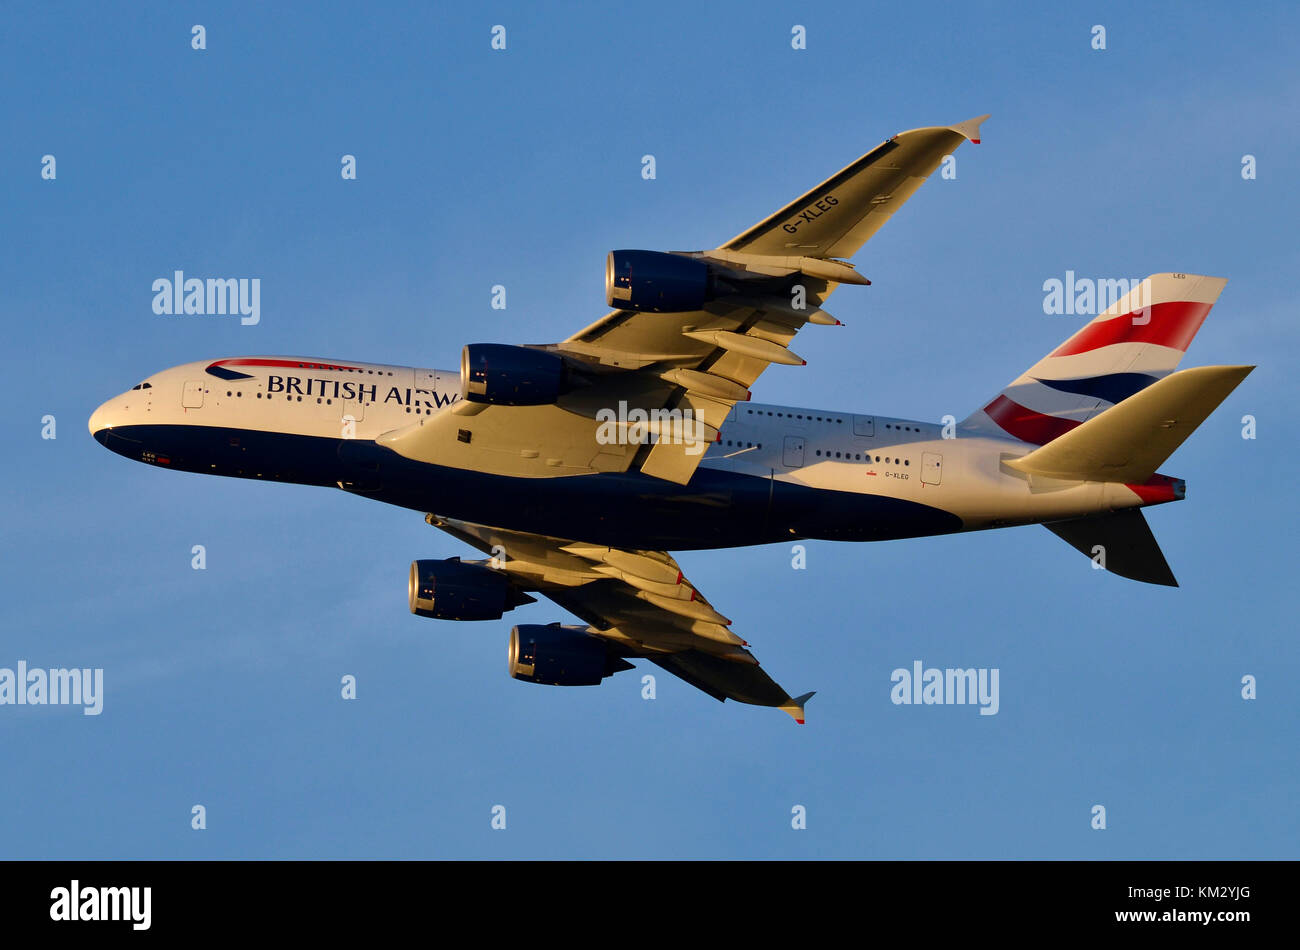 Airbus A380, British Airways, Heathrow Airport, UK. Airbus A380-841 G-XLEG is seen flying away after take-off at sunset. Stock Photo